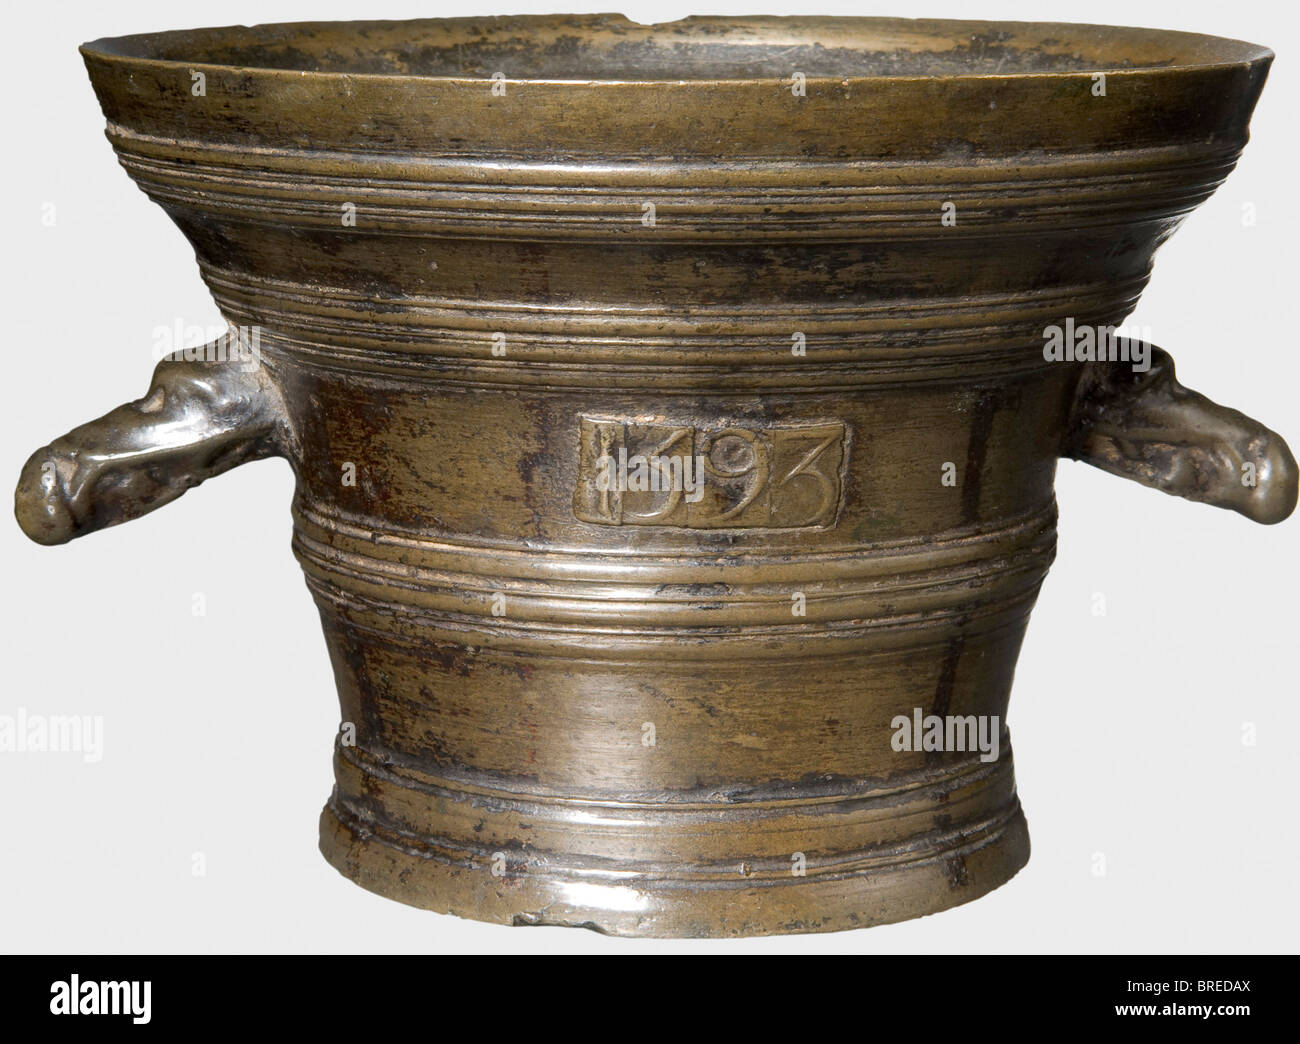 An Italian bronze mortar, dated 1593 Bronze with beautiful old patina. Conical body with strongly flared lip and a small pedestal. The exterior with banded sections, on the viewing surface applied '1593'. Two lateral dragon-headed handles. The lip has some small nicks. Height 12 cm, diameter 17.5 cm. historic, historical, 16th century, handicrafts, handcraft, craft, object, objects, stills, clipping, clippings, cut out, cut-out, cut-outs, vessel, vessels, Stock Photo